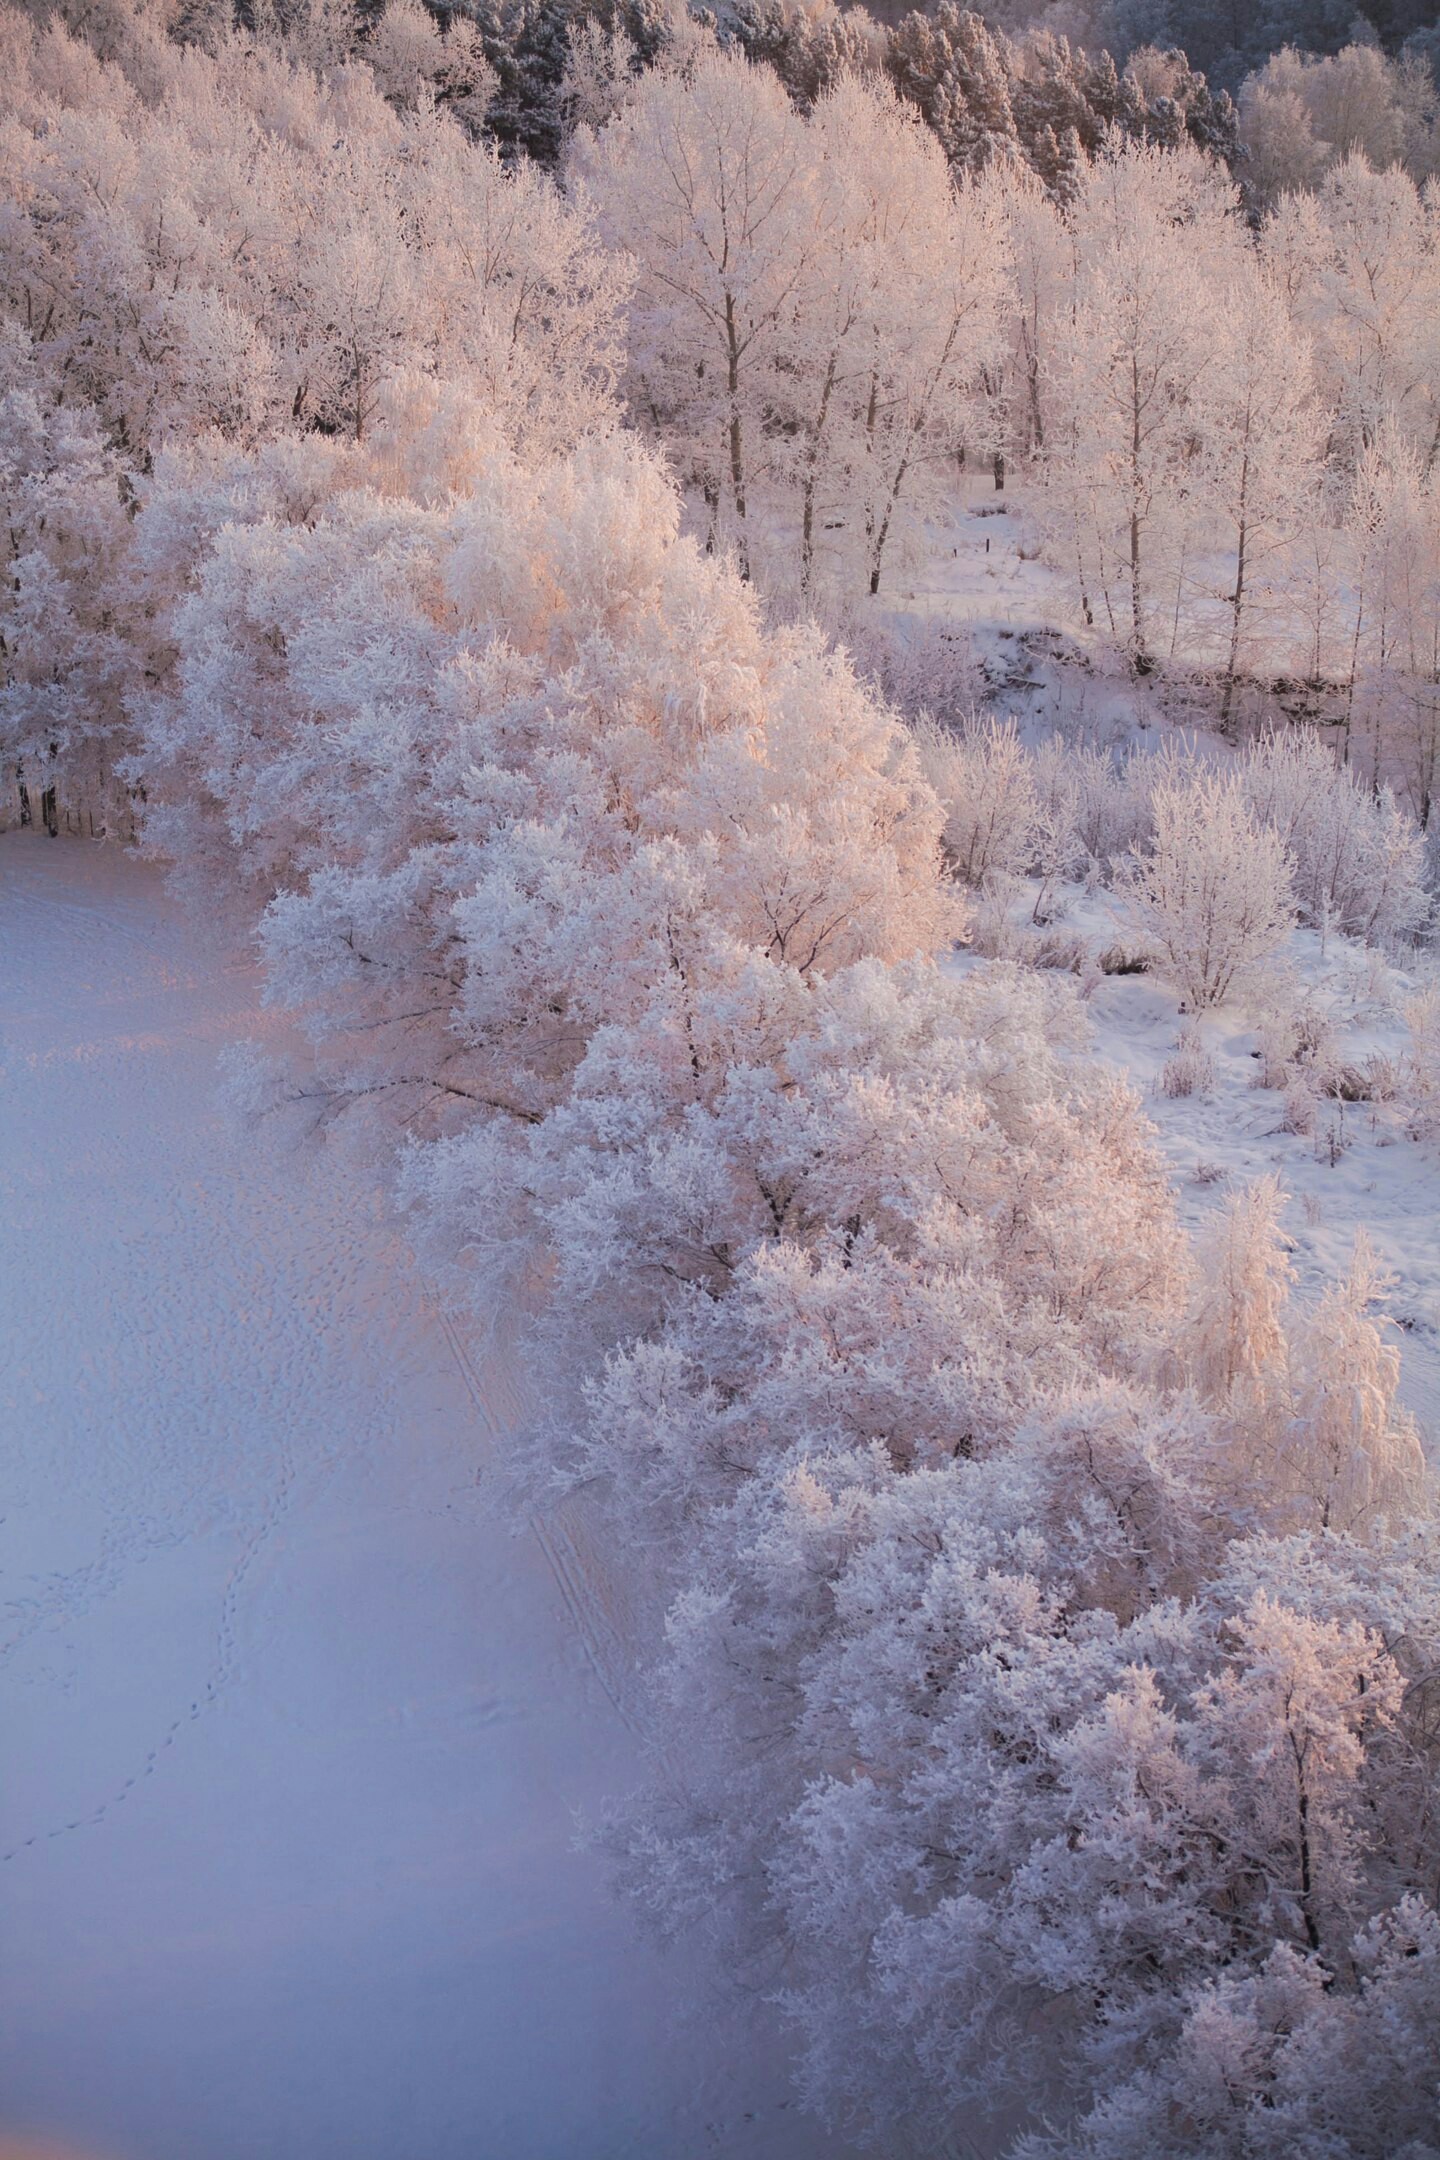 Frosty sunrise in Novosibirsk - freezing, Cold, Snow, Winter, Novosibirsk, dawn, Nature, Russia